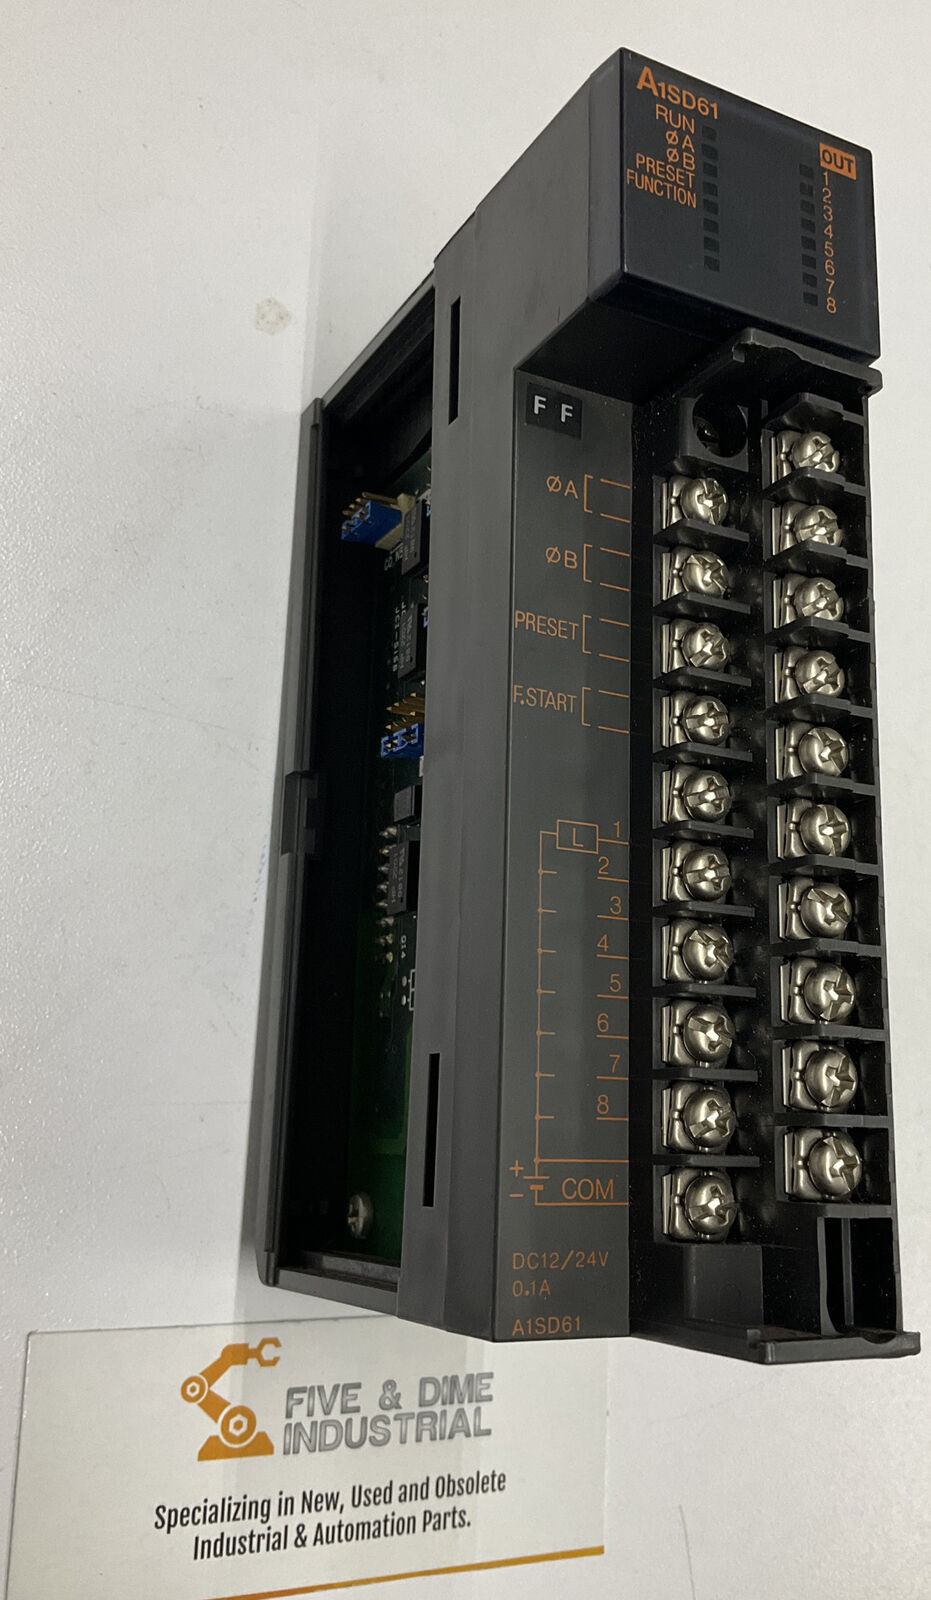 Mitsubishi A15D61 High Speed Counting Unit Module (YE193)